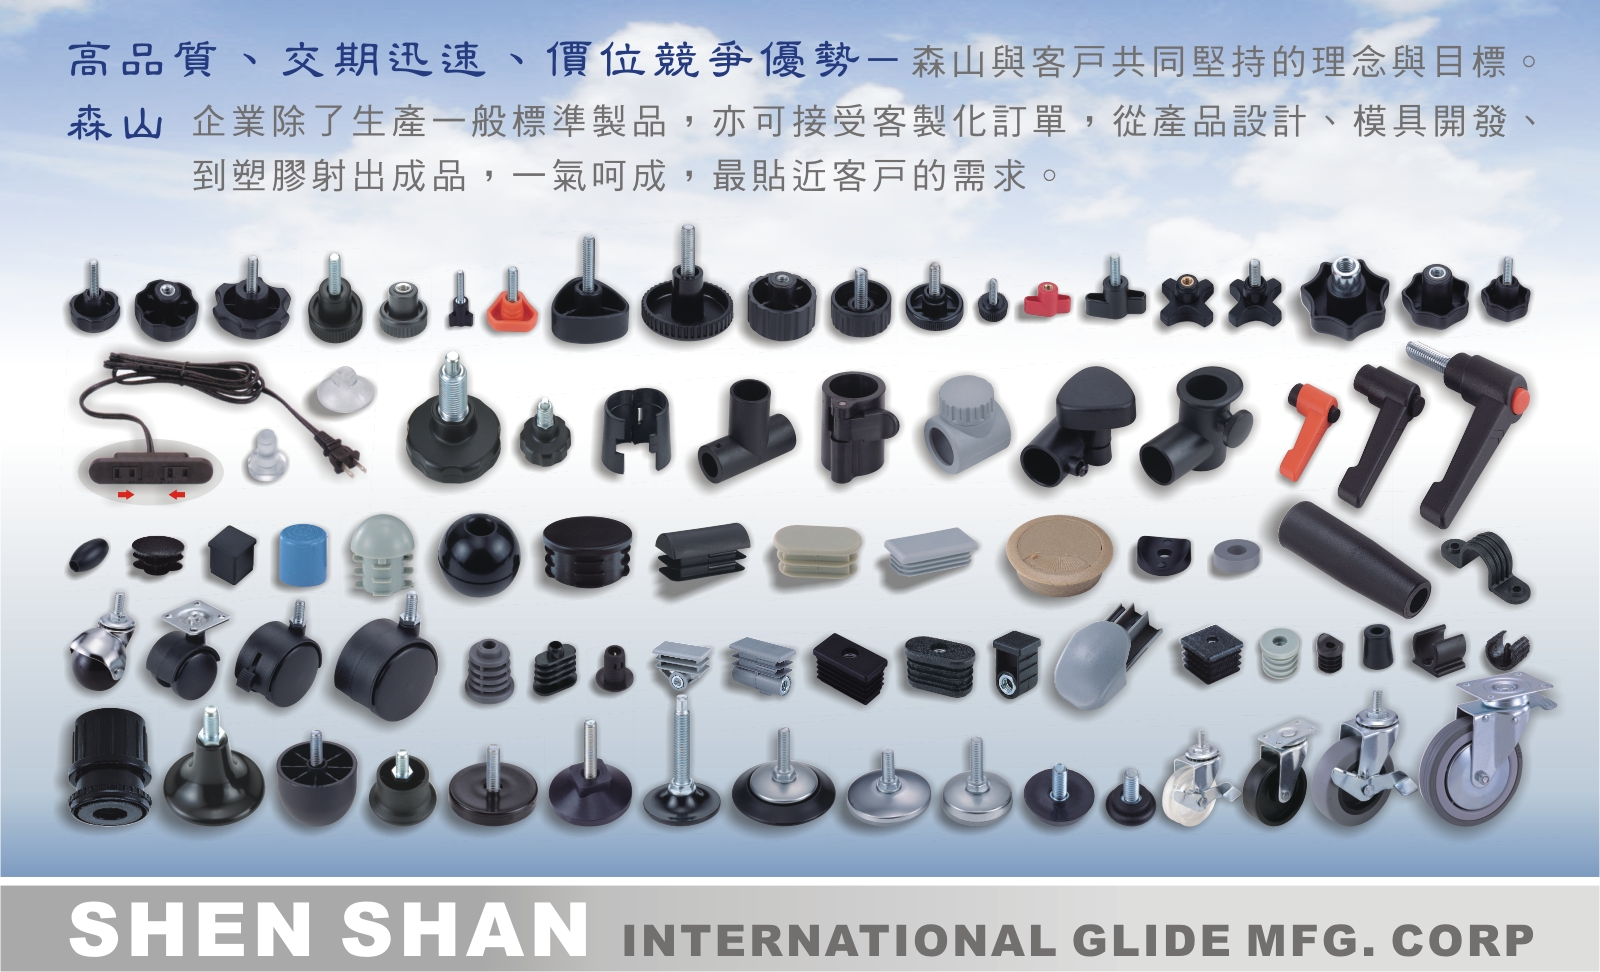 Shen Shan is a seasoned furniture parts maker with mature production capability.